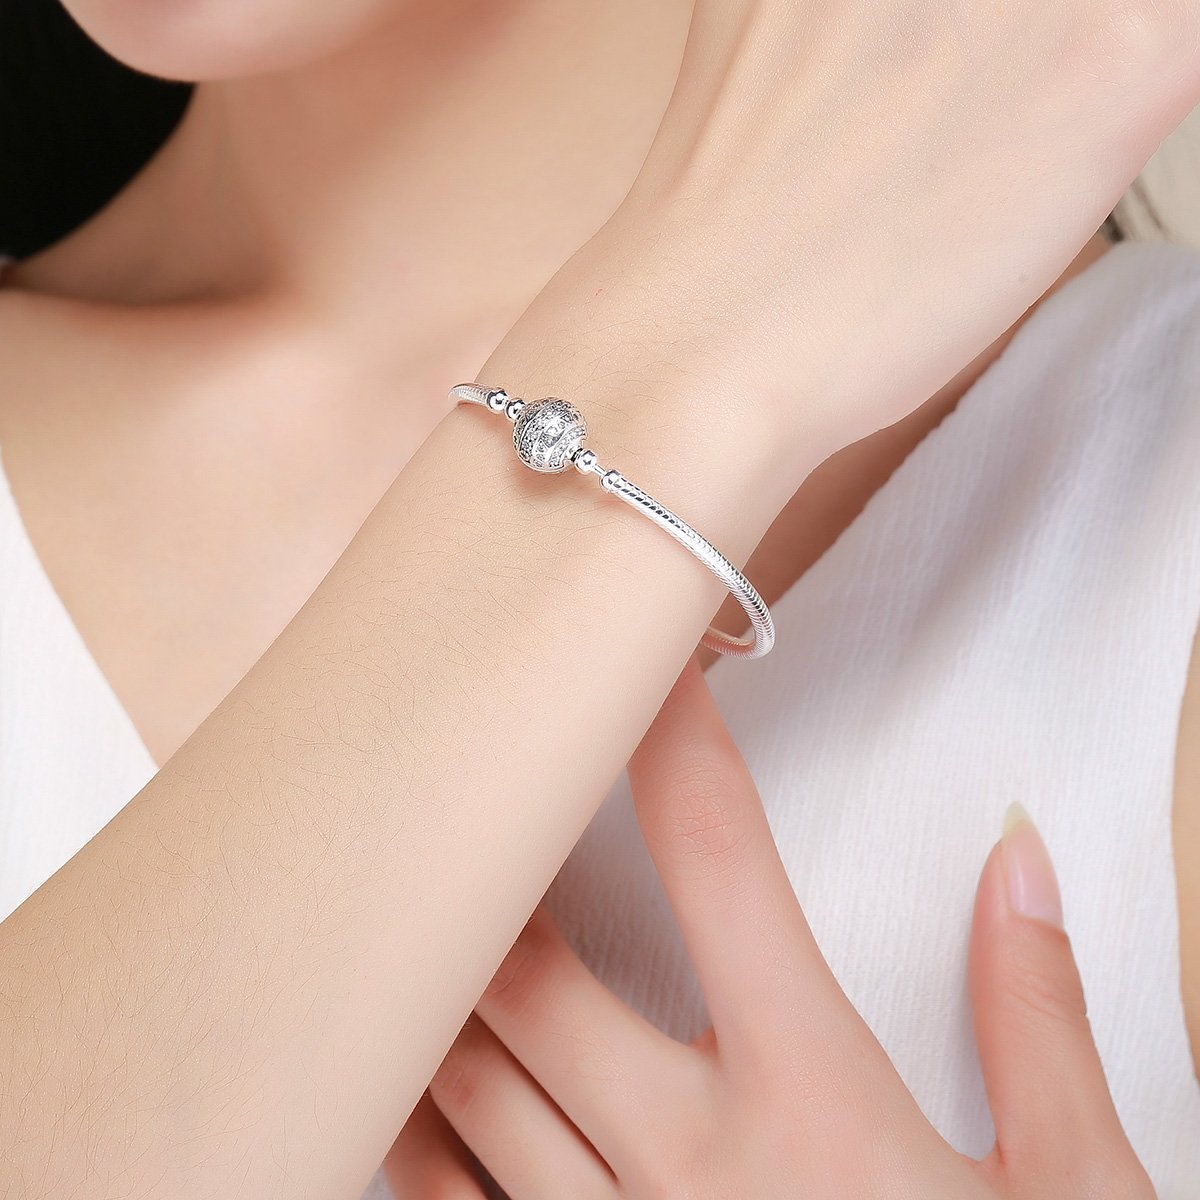 Clear Round Claps Snake Chain Elegant 925 Sterling Silver Bracelet - Aisllin Jewelry